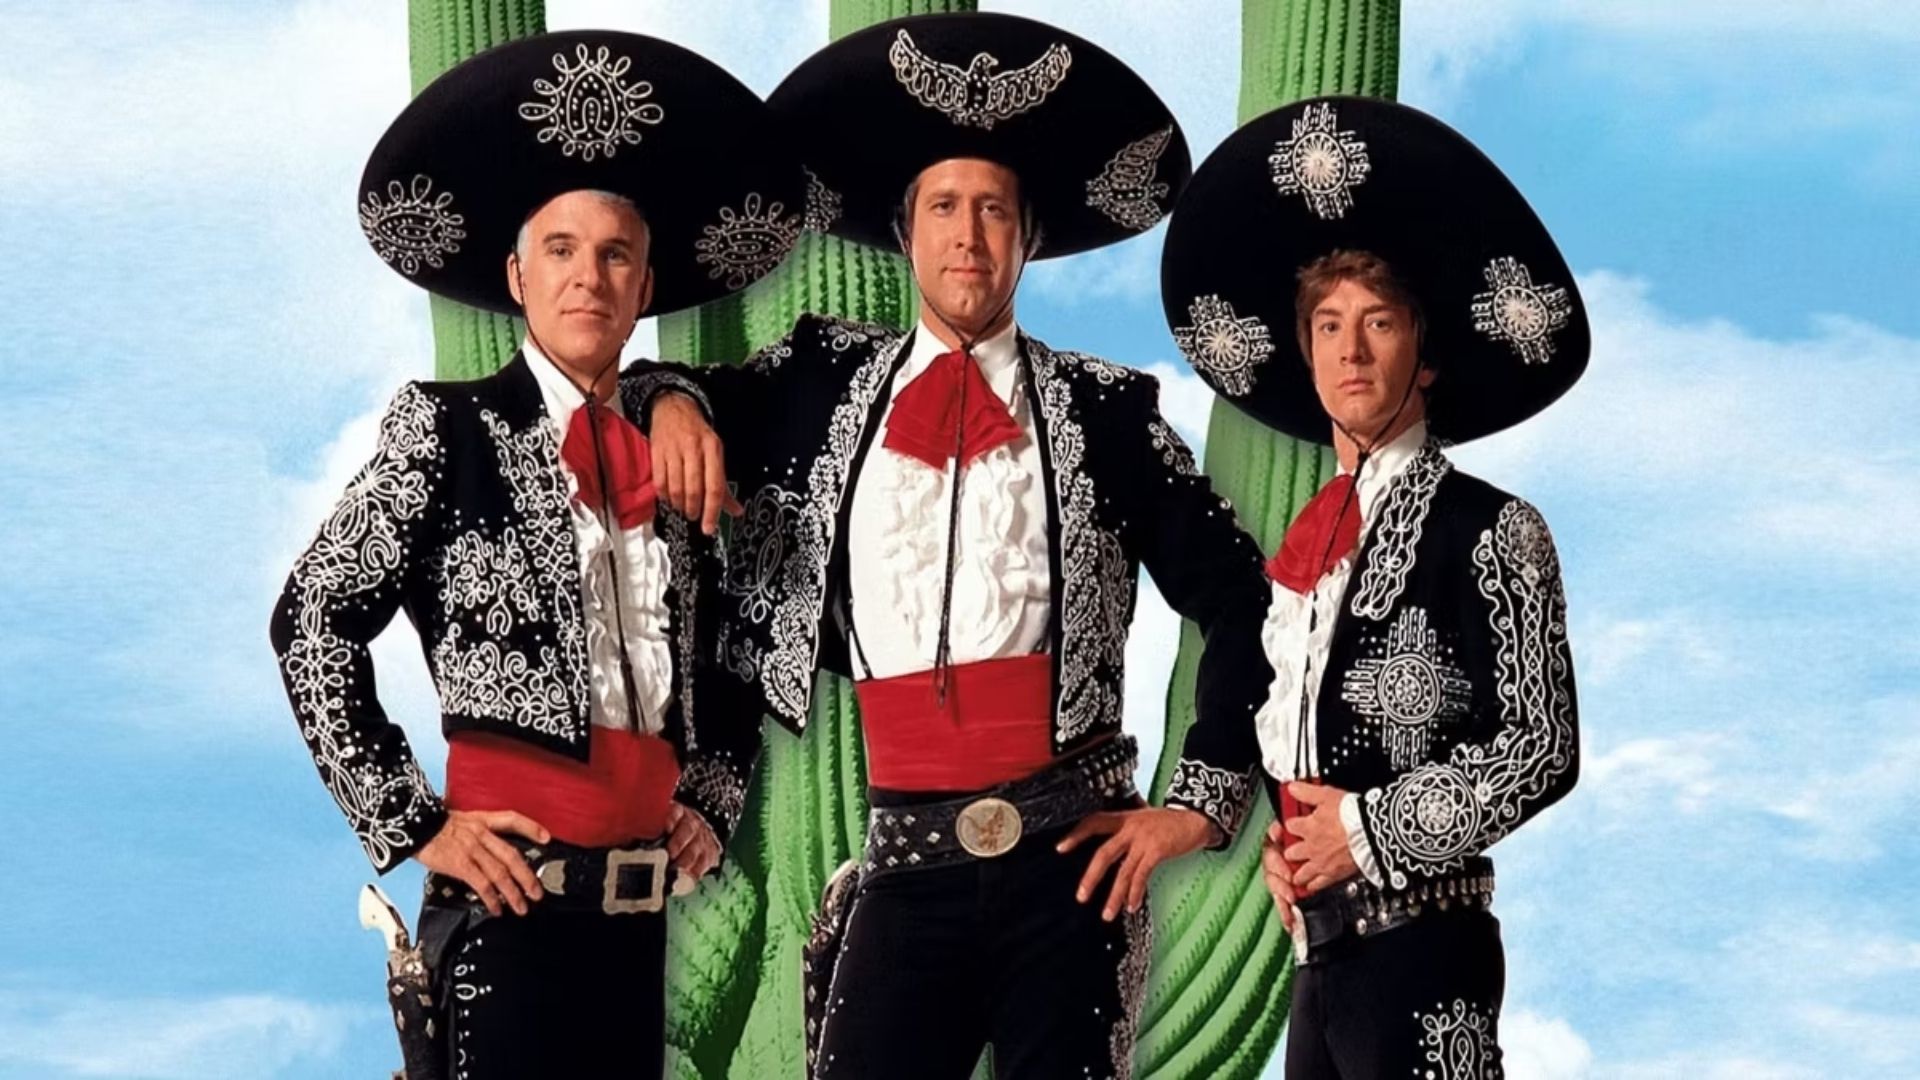 Steve Martin, Chevy Chase, and Martin Short in Three Amigos 